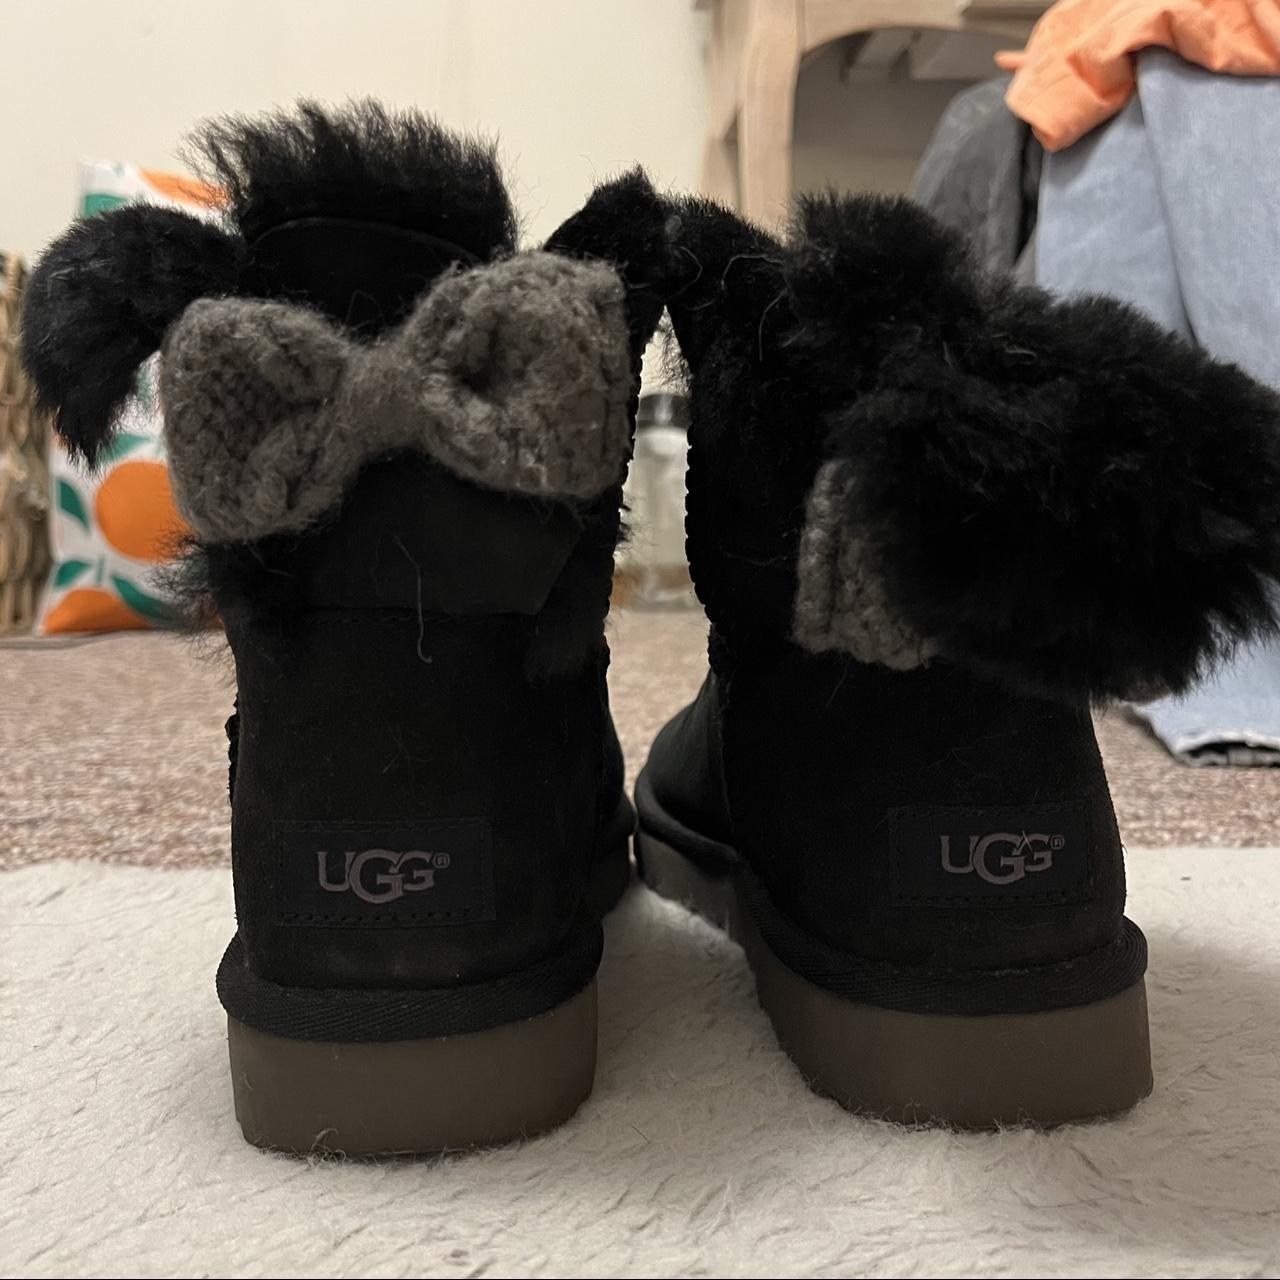 Black uggs with grey bow detail - Depop